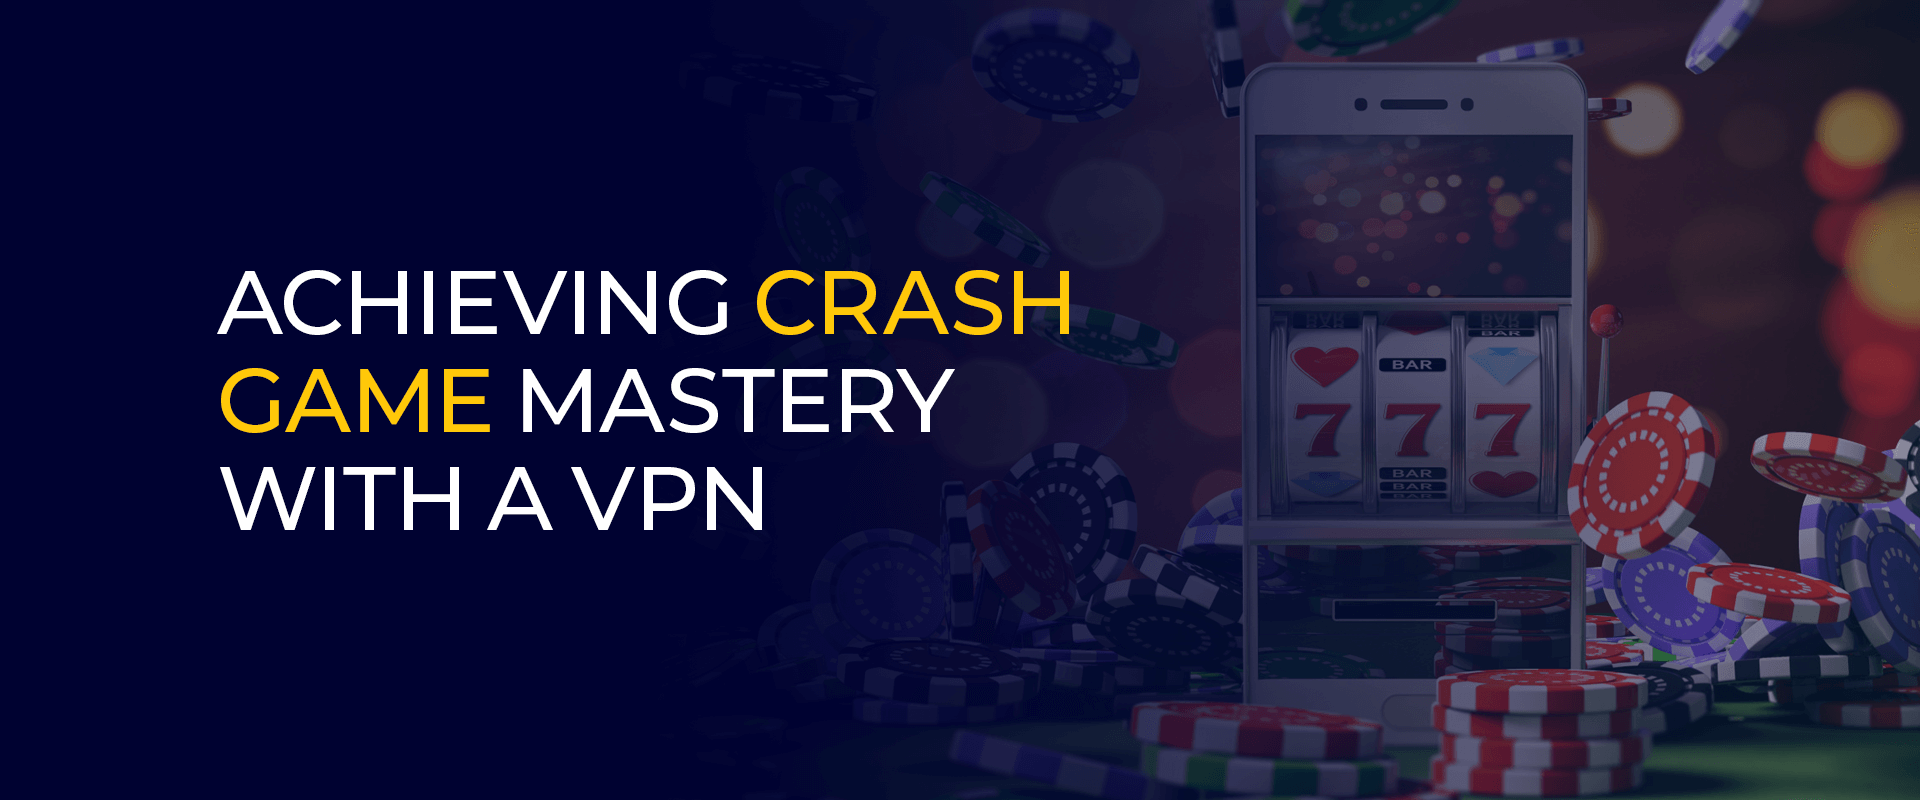 Achieving Crash Game Mastery With a VPN